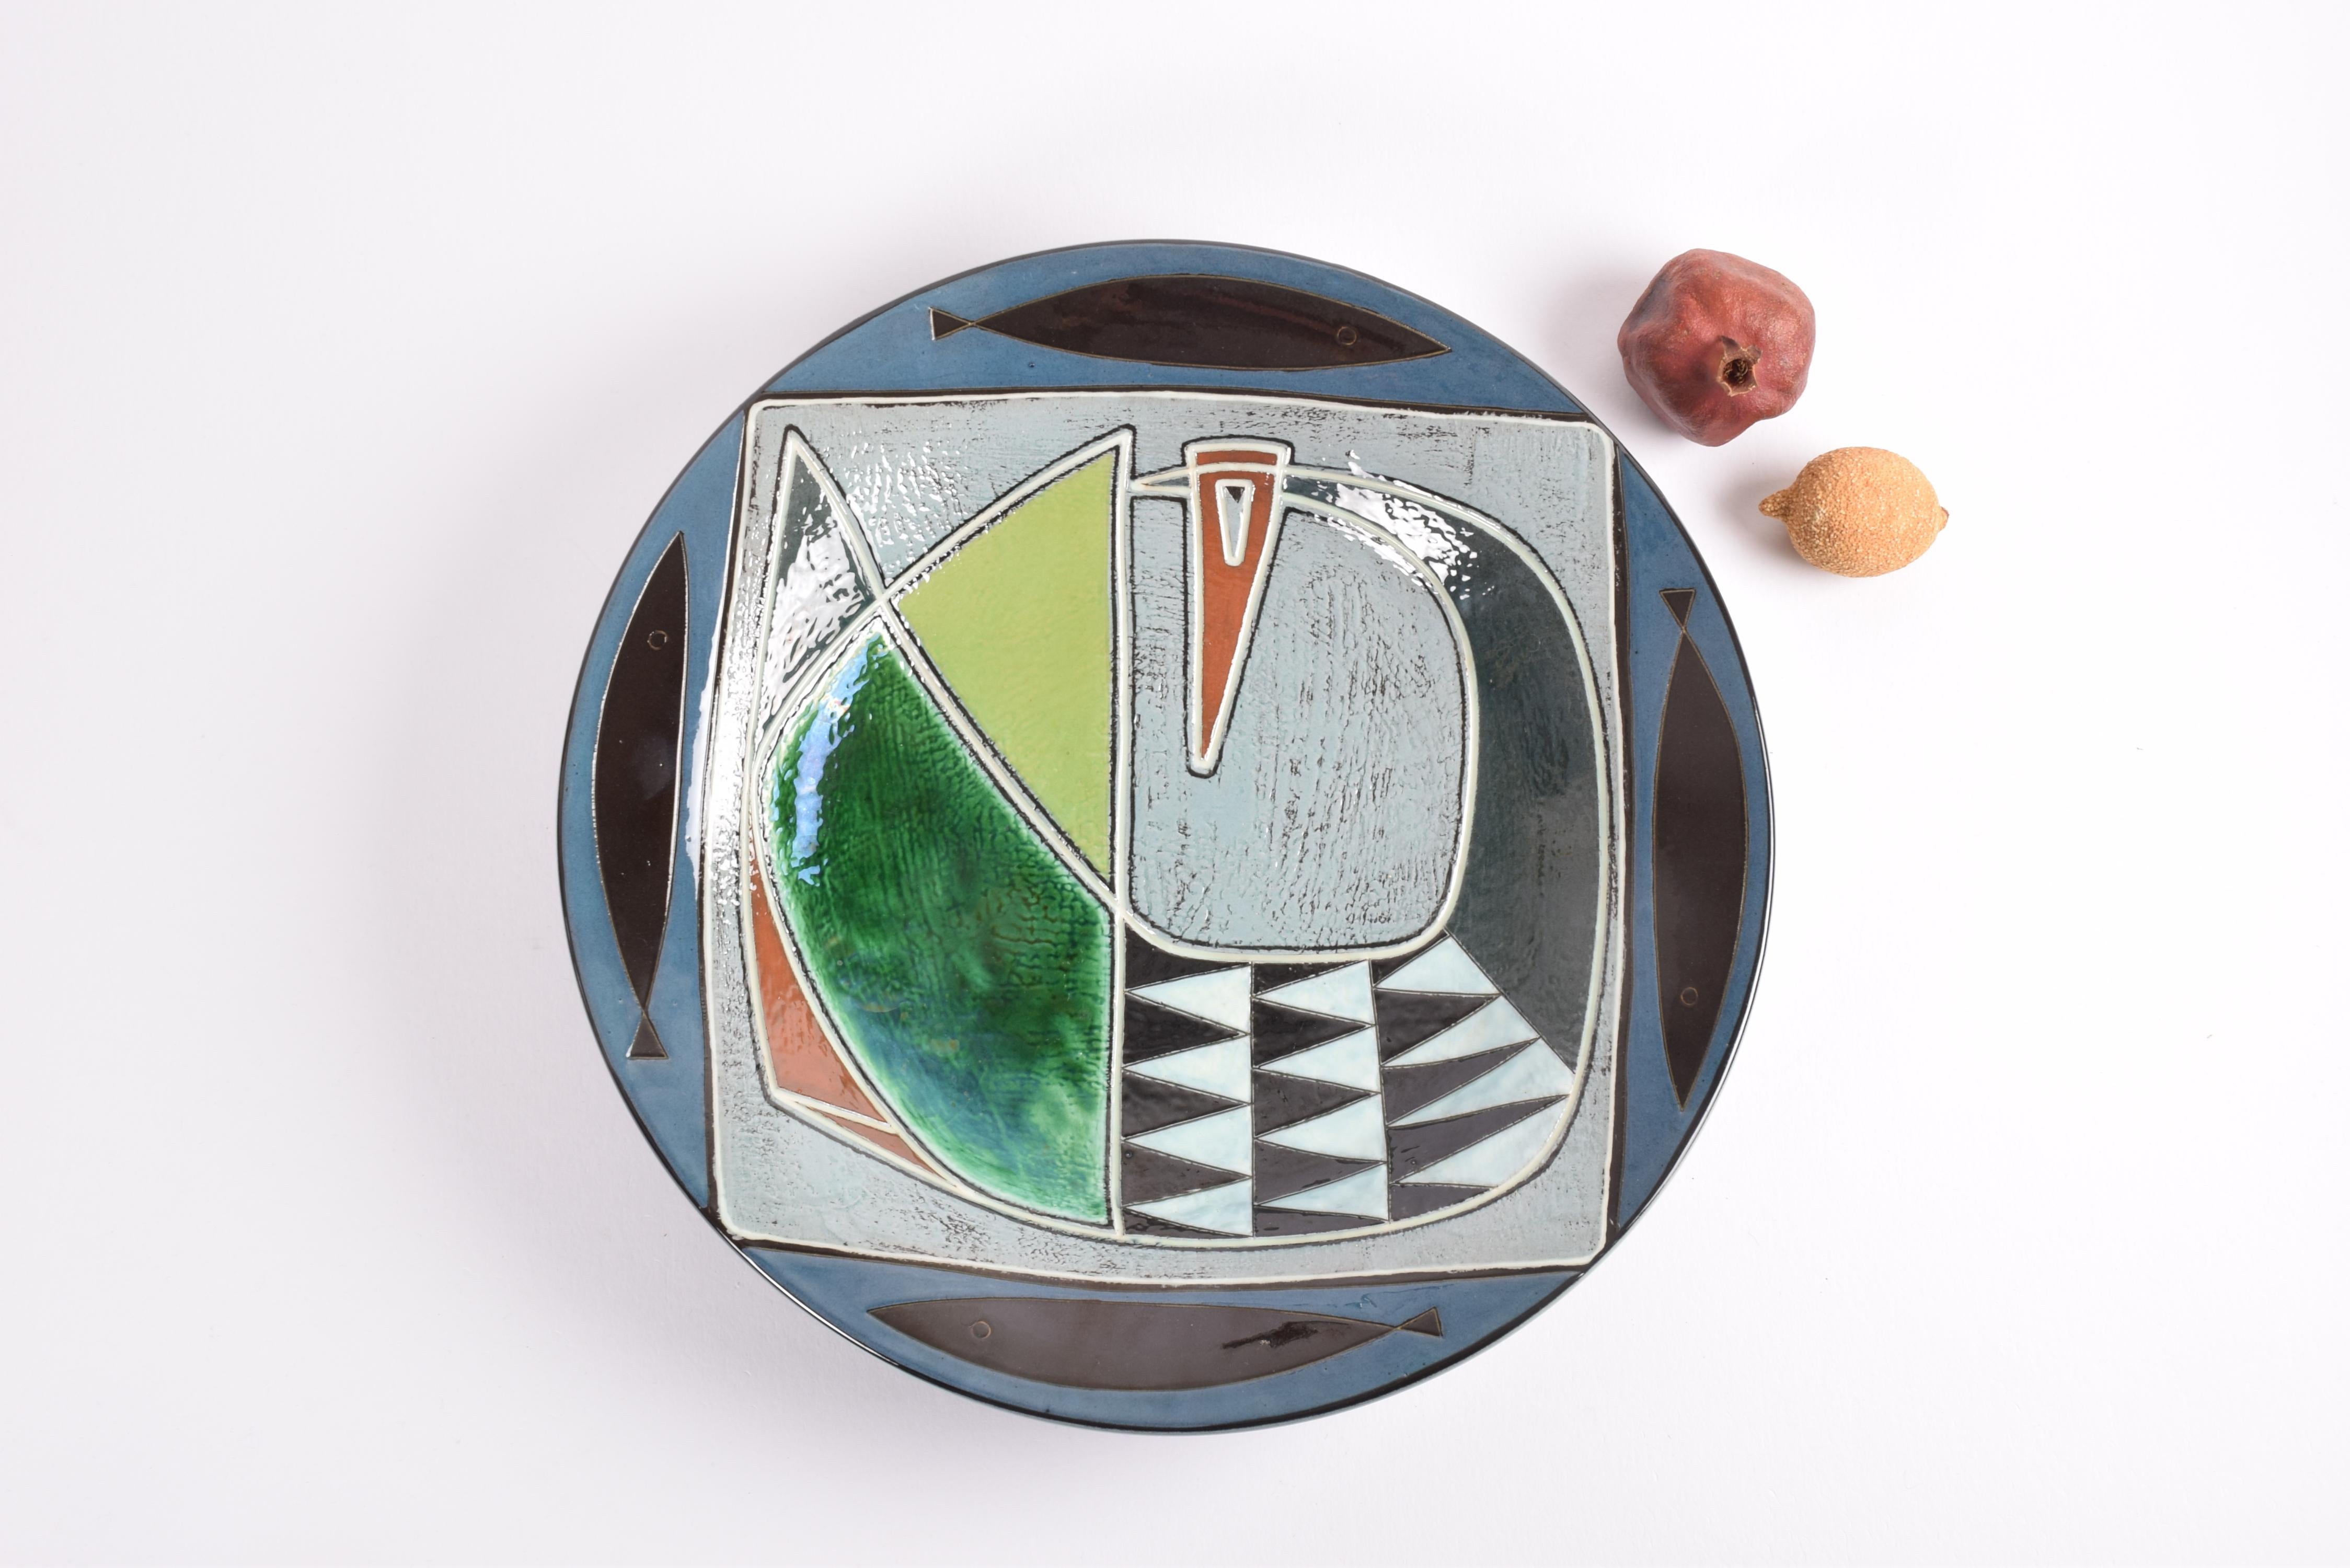 Huge platter by Gete Petersen for Kähler´s ceramic workshop in Denmark.
The decor shows a large stylised bird in center surrounded by four stylised fishes. 

The platter can be used as a display piece on the table. For hanging on the wall you